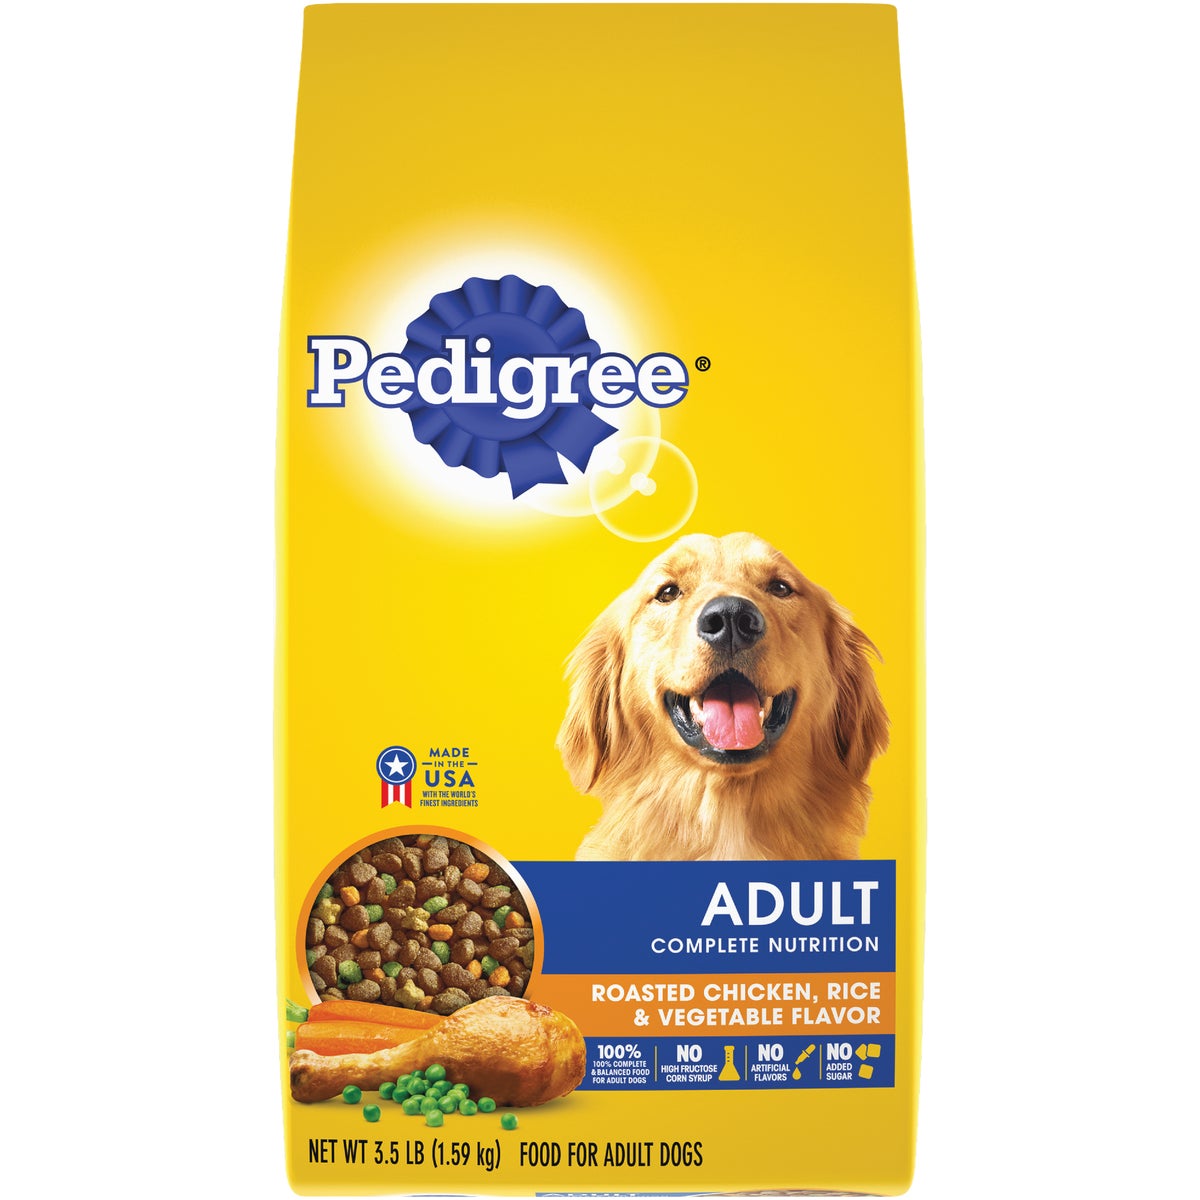 Pedigree Complete Nutrition 3.5 Lb. Roasted Chicken, Rice, & Vegetable Adult Dry Dog Food